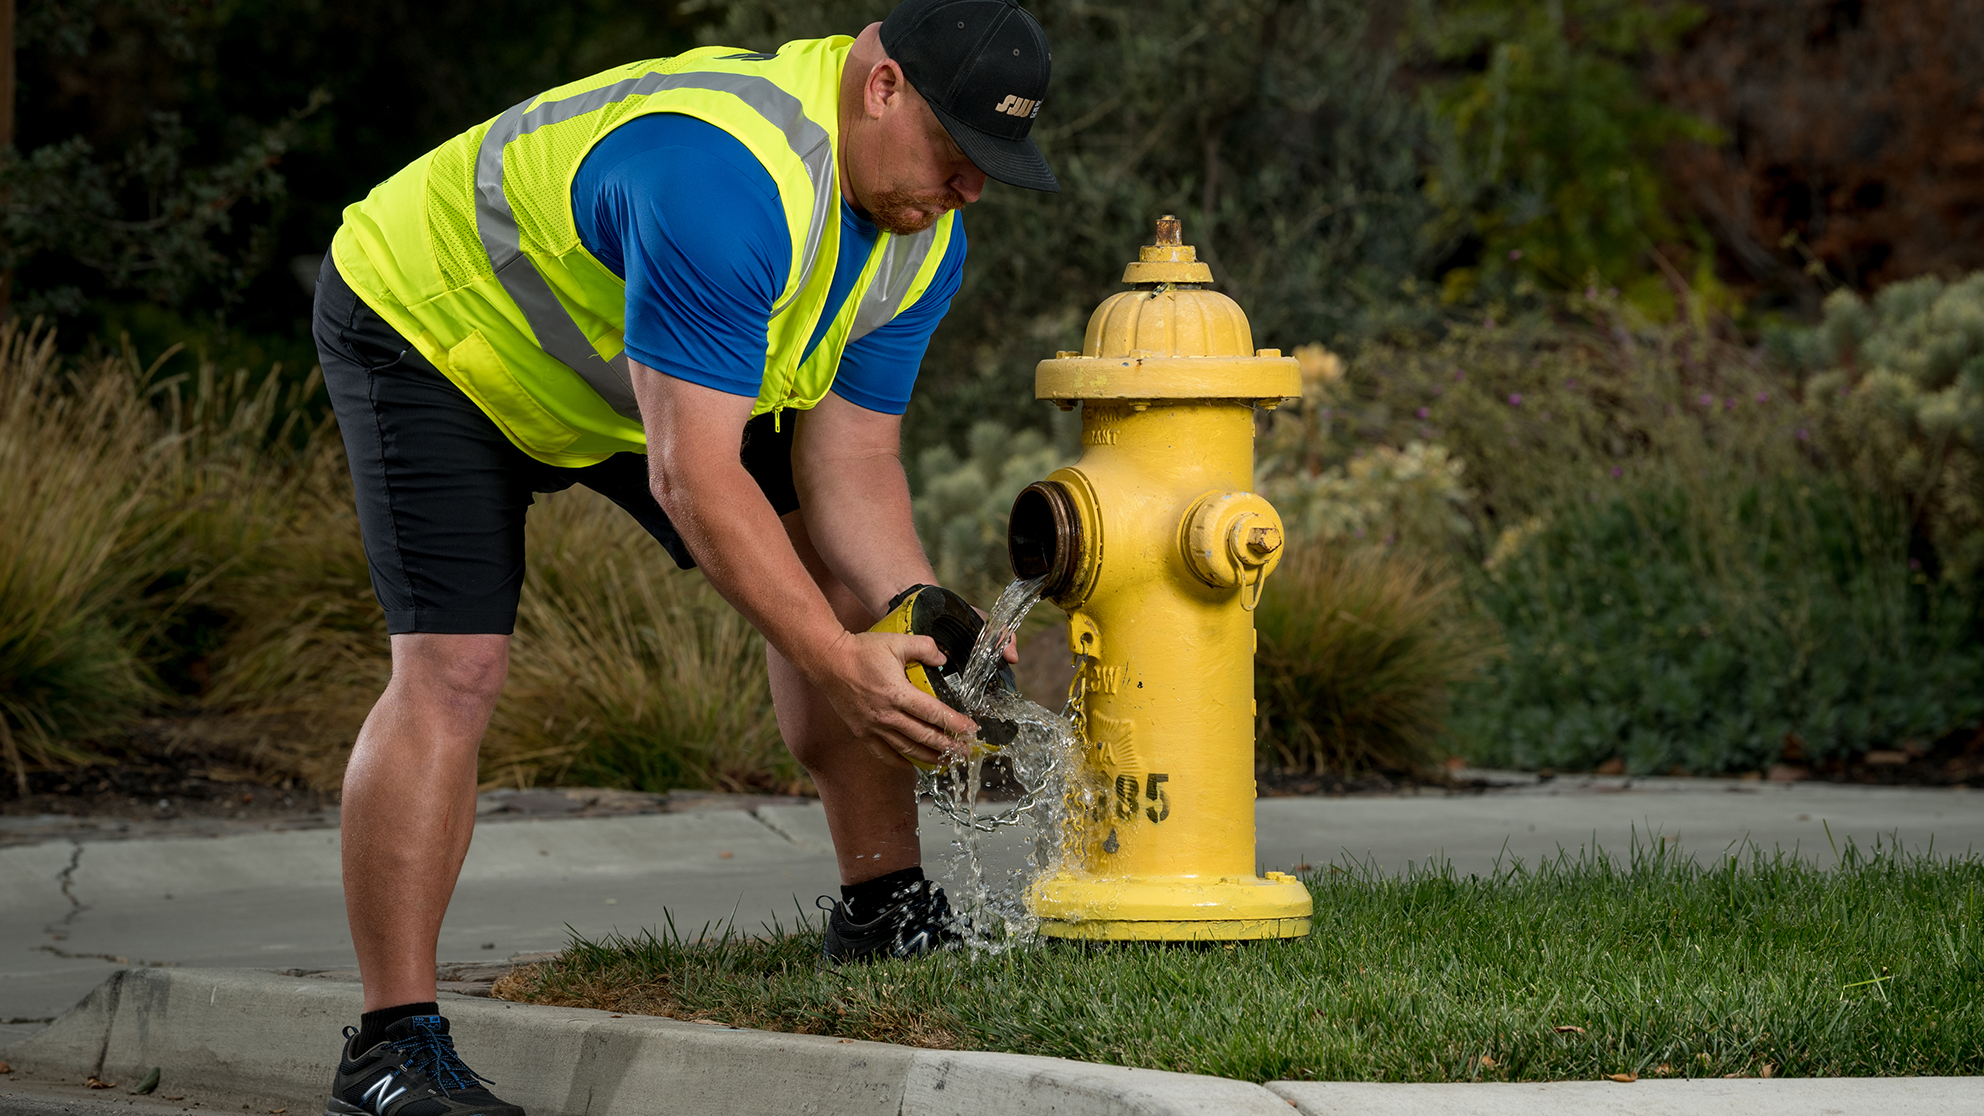 A San Jose Water employee removing the cap of a fire hydrant as some water leaks out.